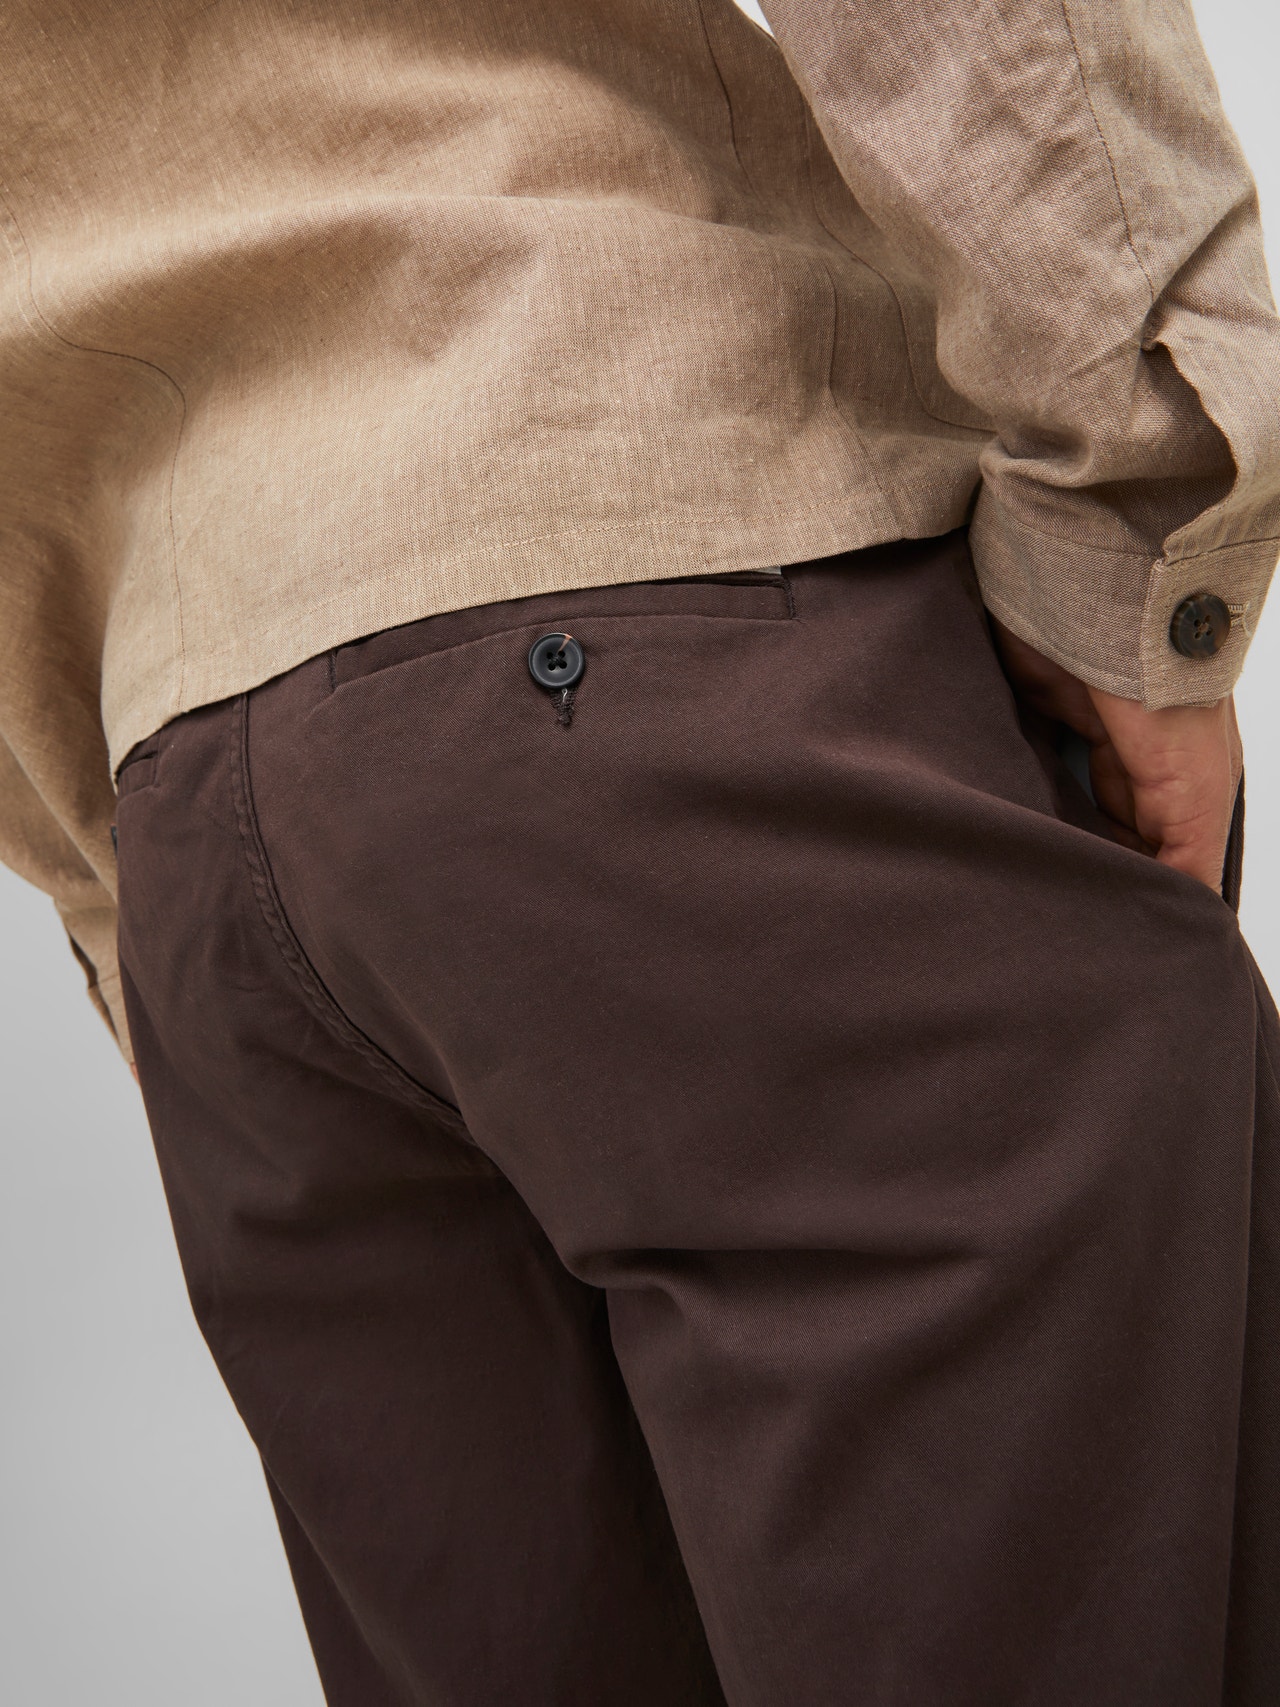 Jack & Jones Wide Fit Chino trousers -Seal Brown - 12219288